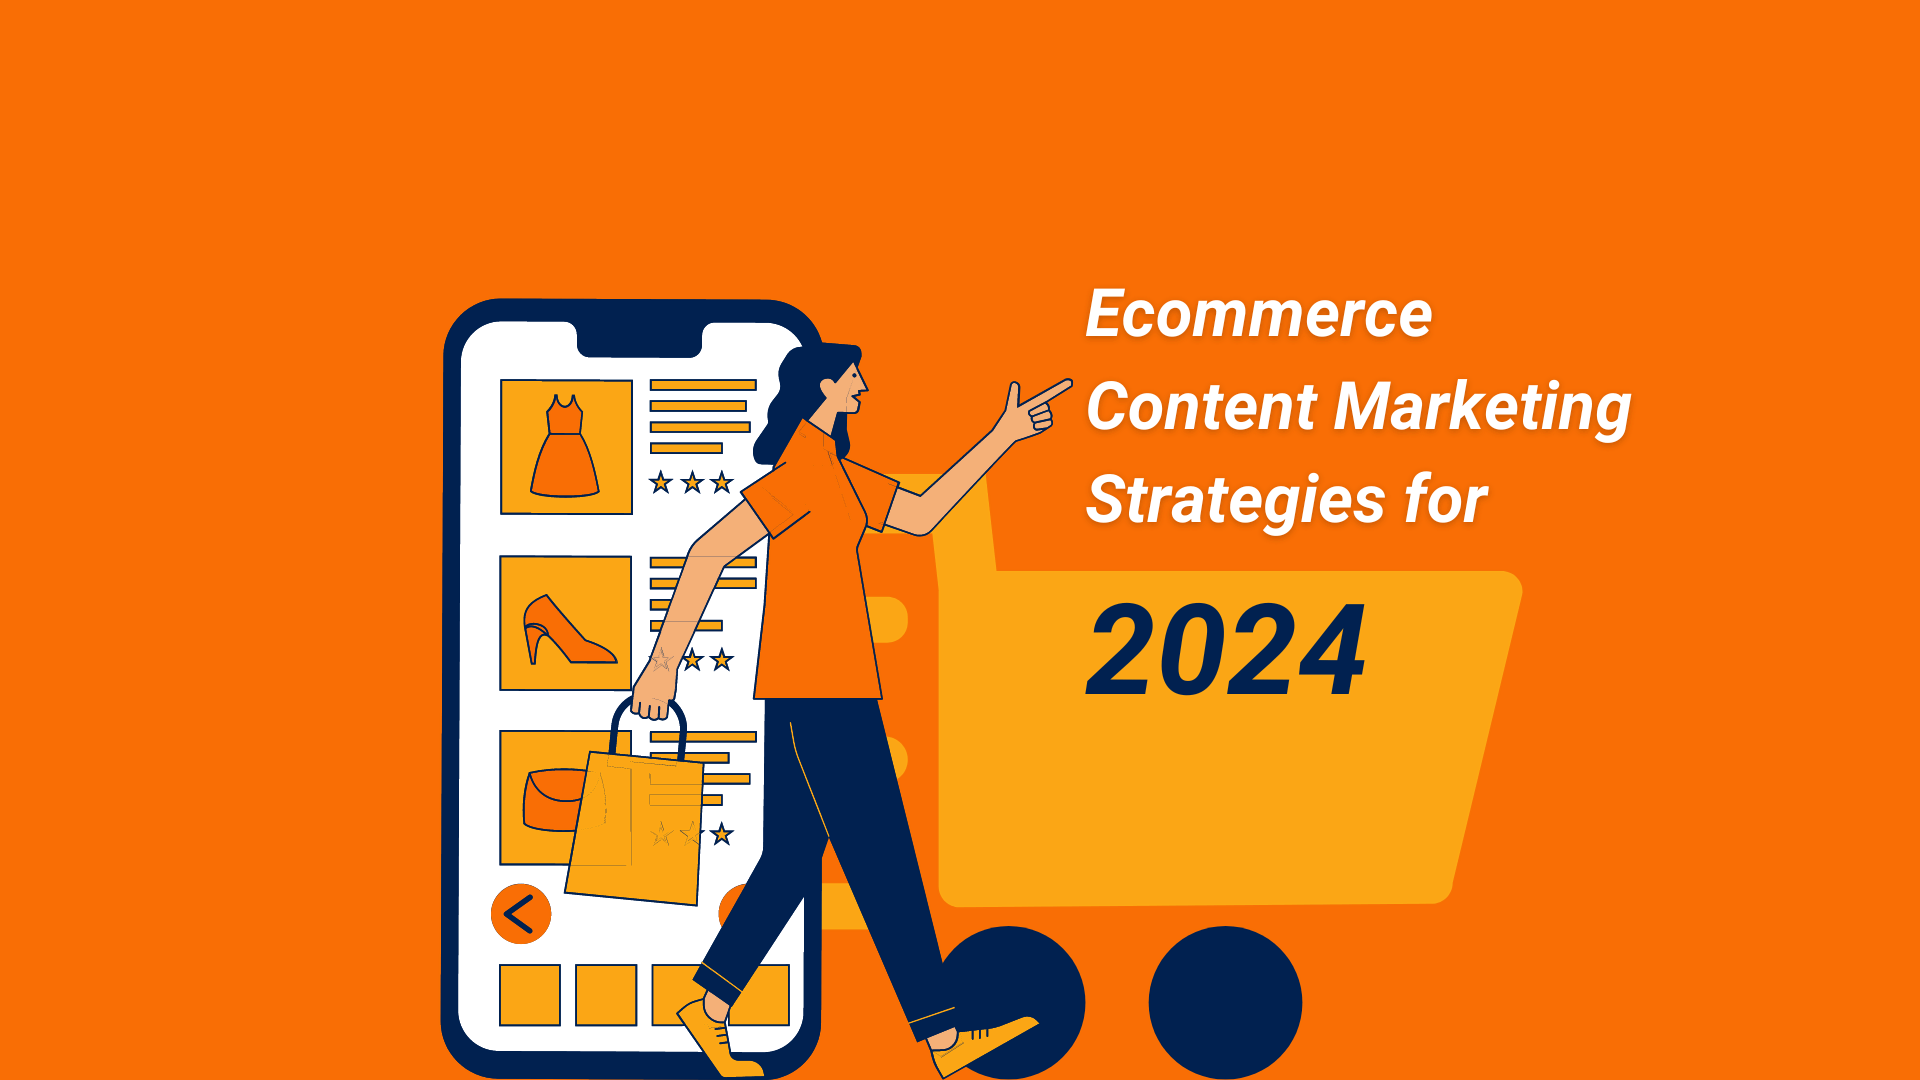 Content Marketing for Ecommerce Sites